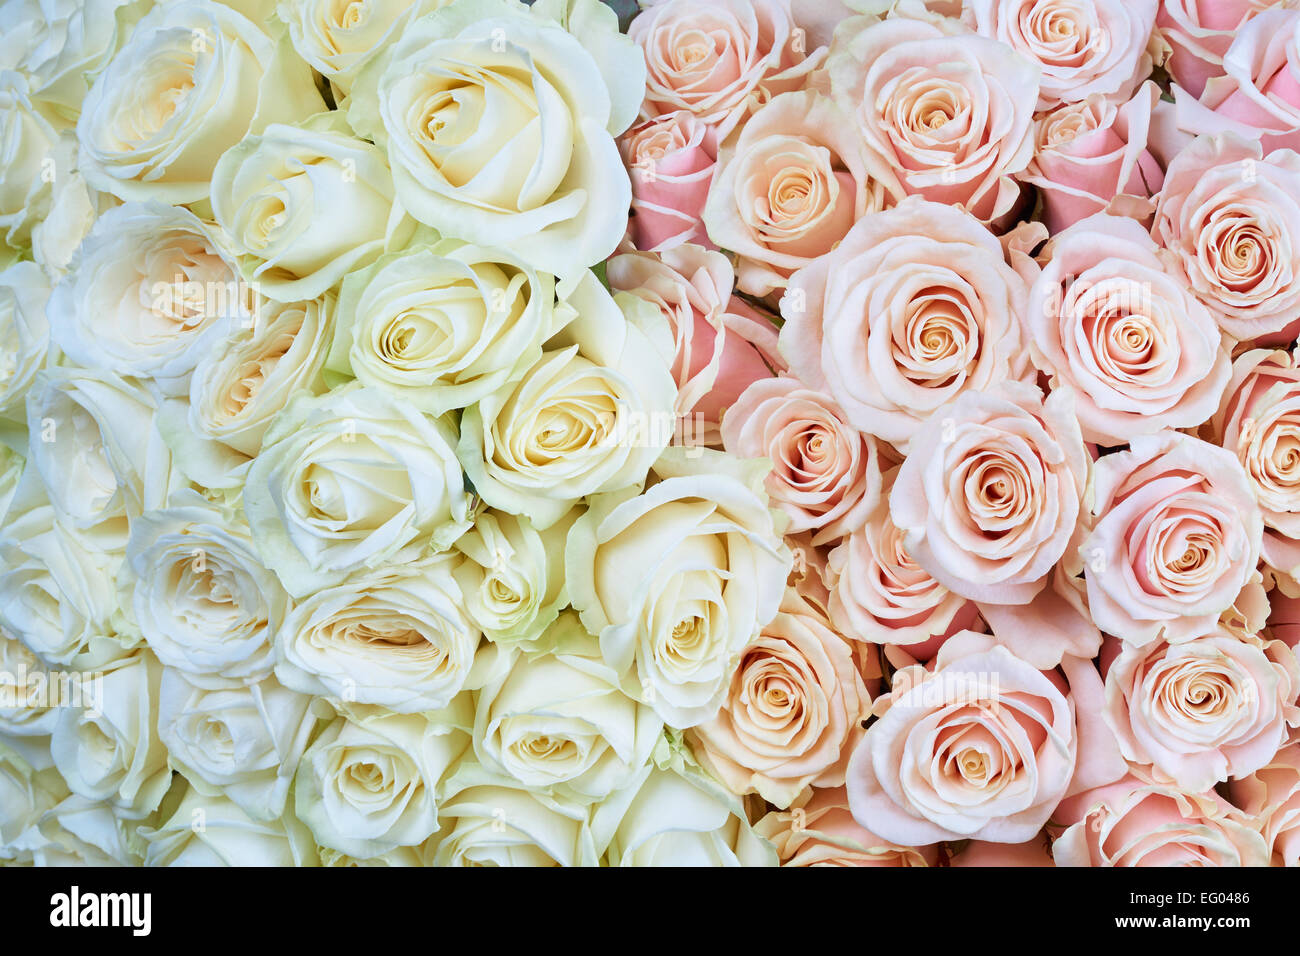 Many pink and white roses as a floral background Stock Photo